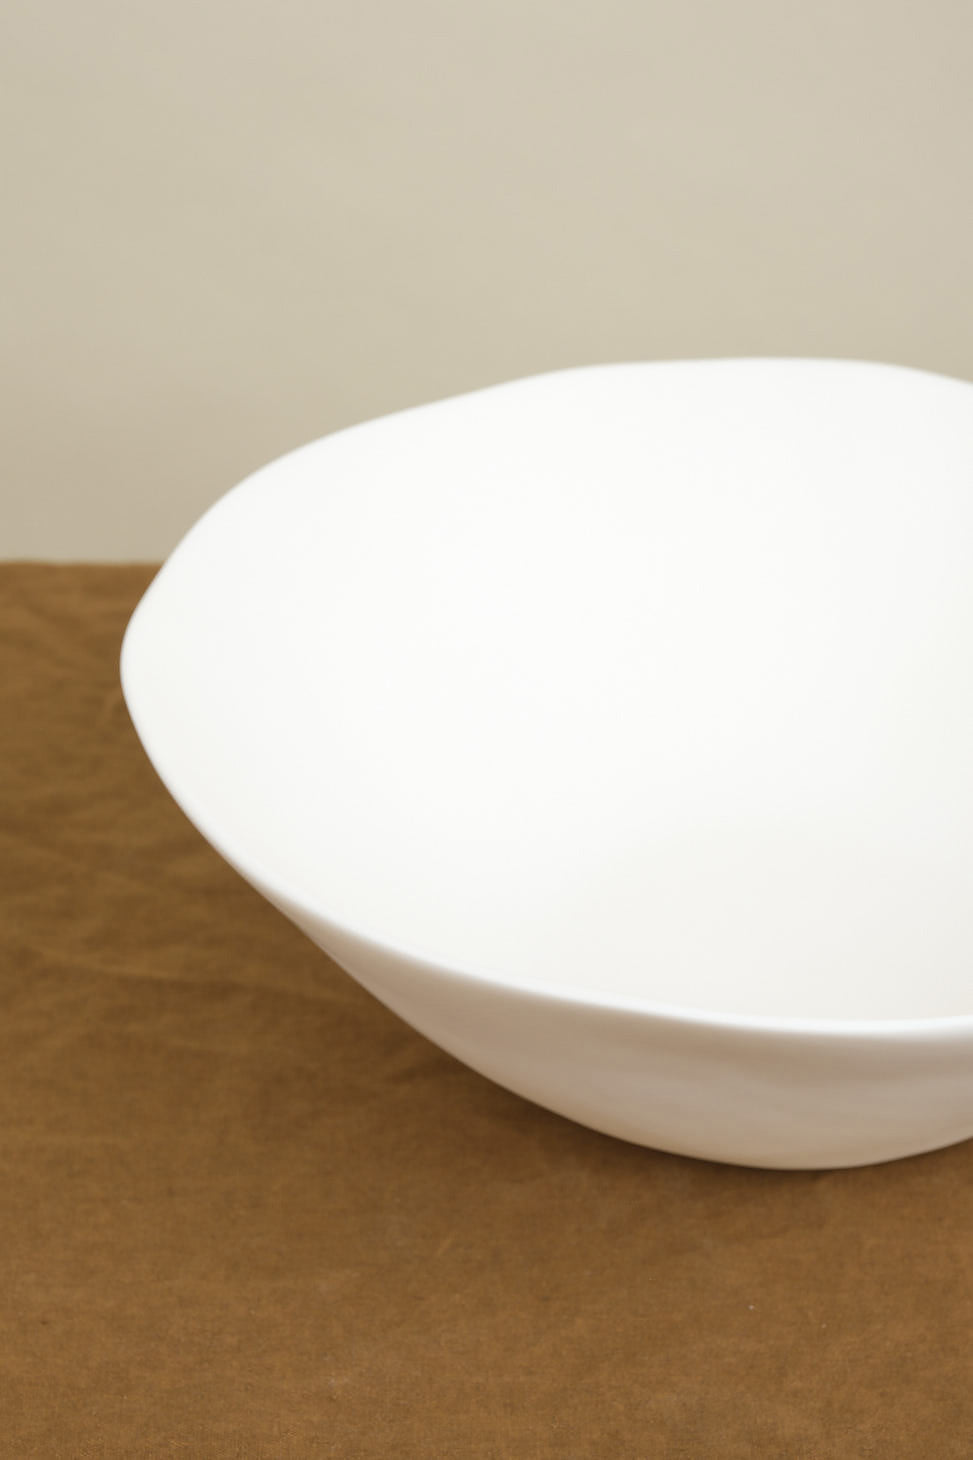 Edge of Large Tapered Bowl